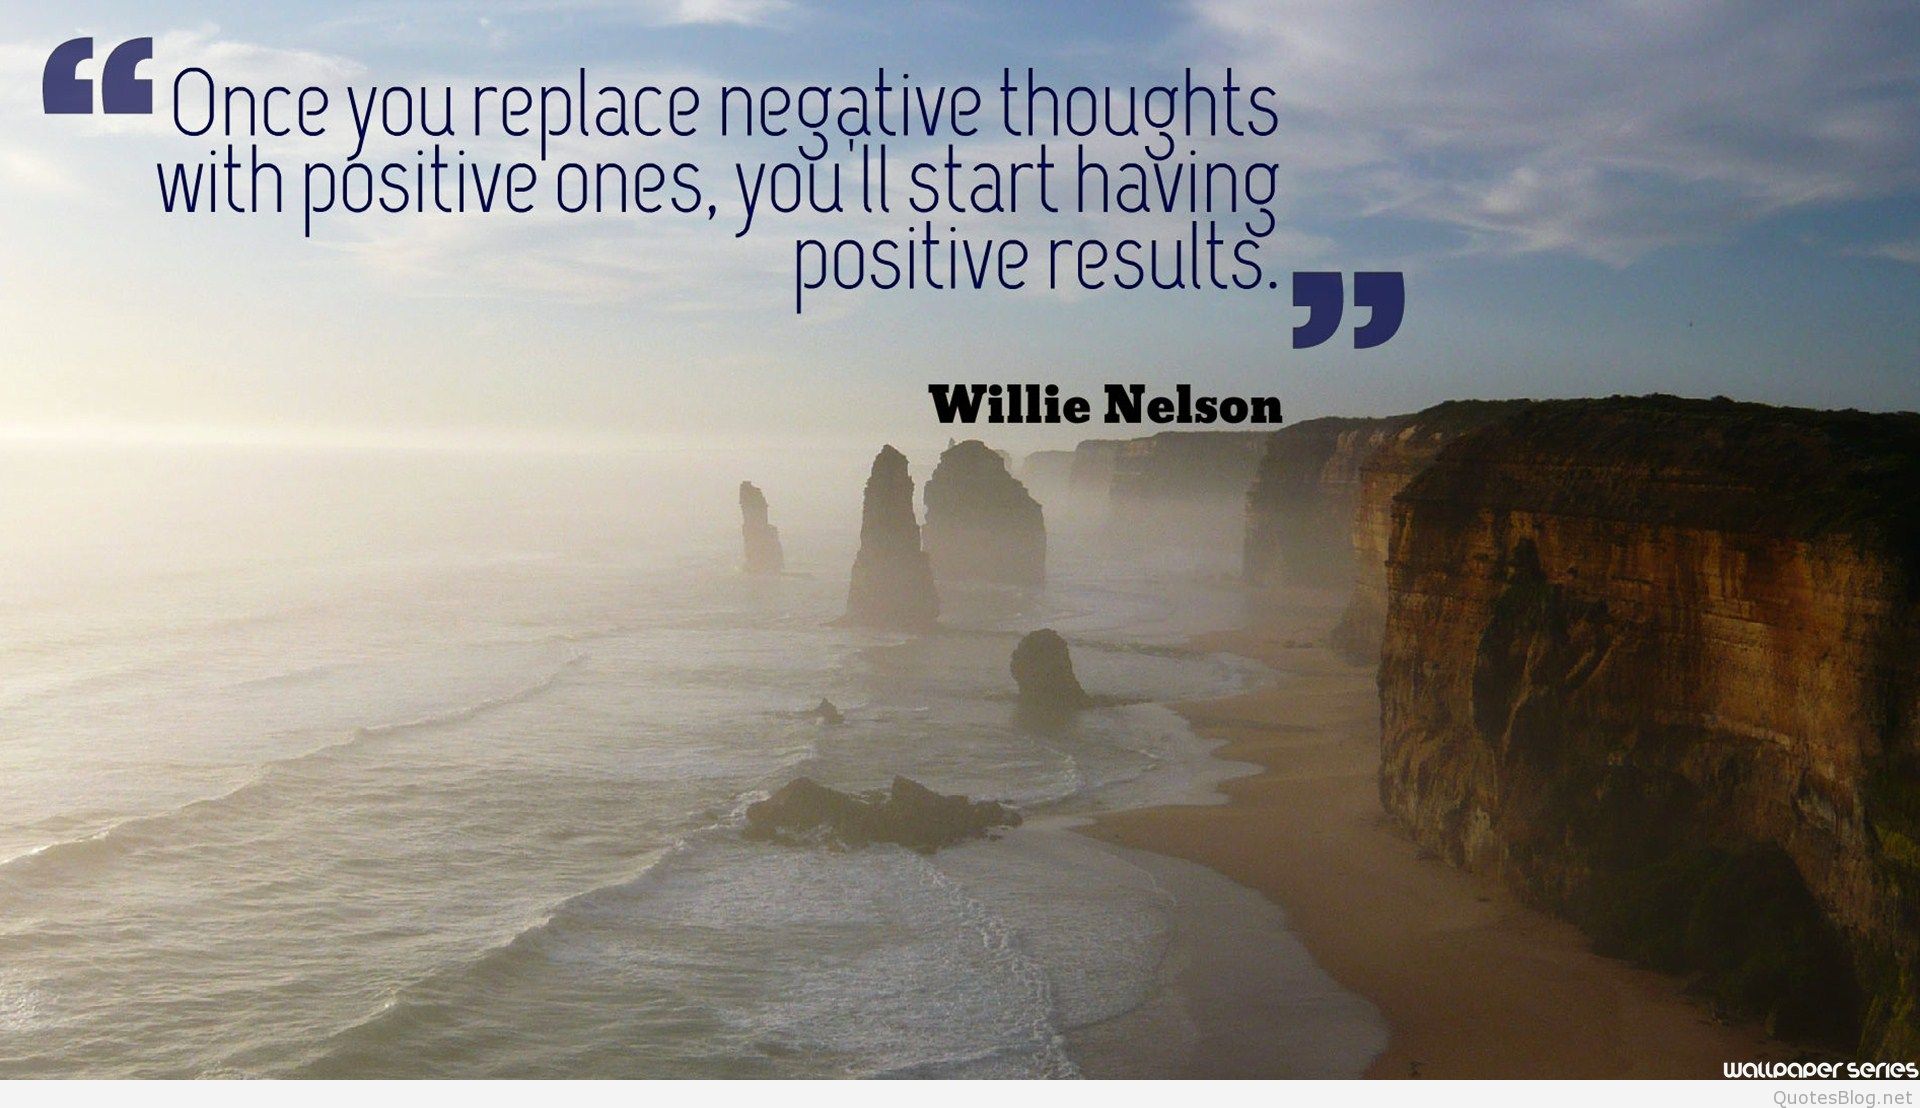 Negative To Positive Thoughts Quotes Wallpaper - Positive Thoughts - HD Wallpaper 